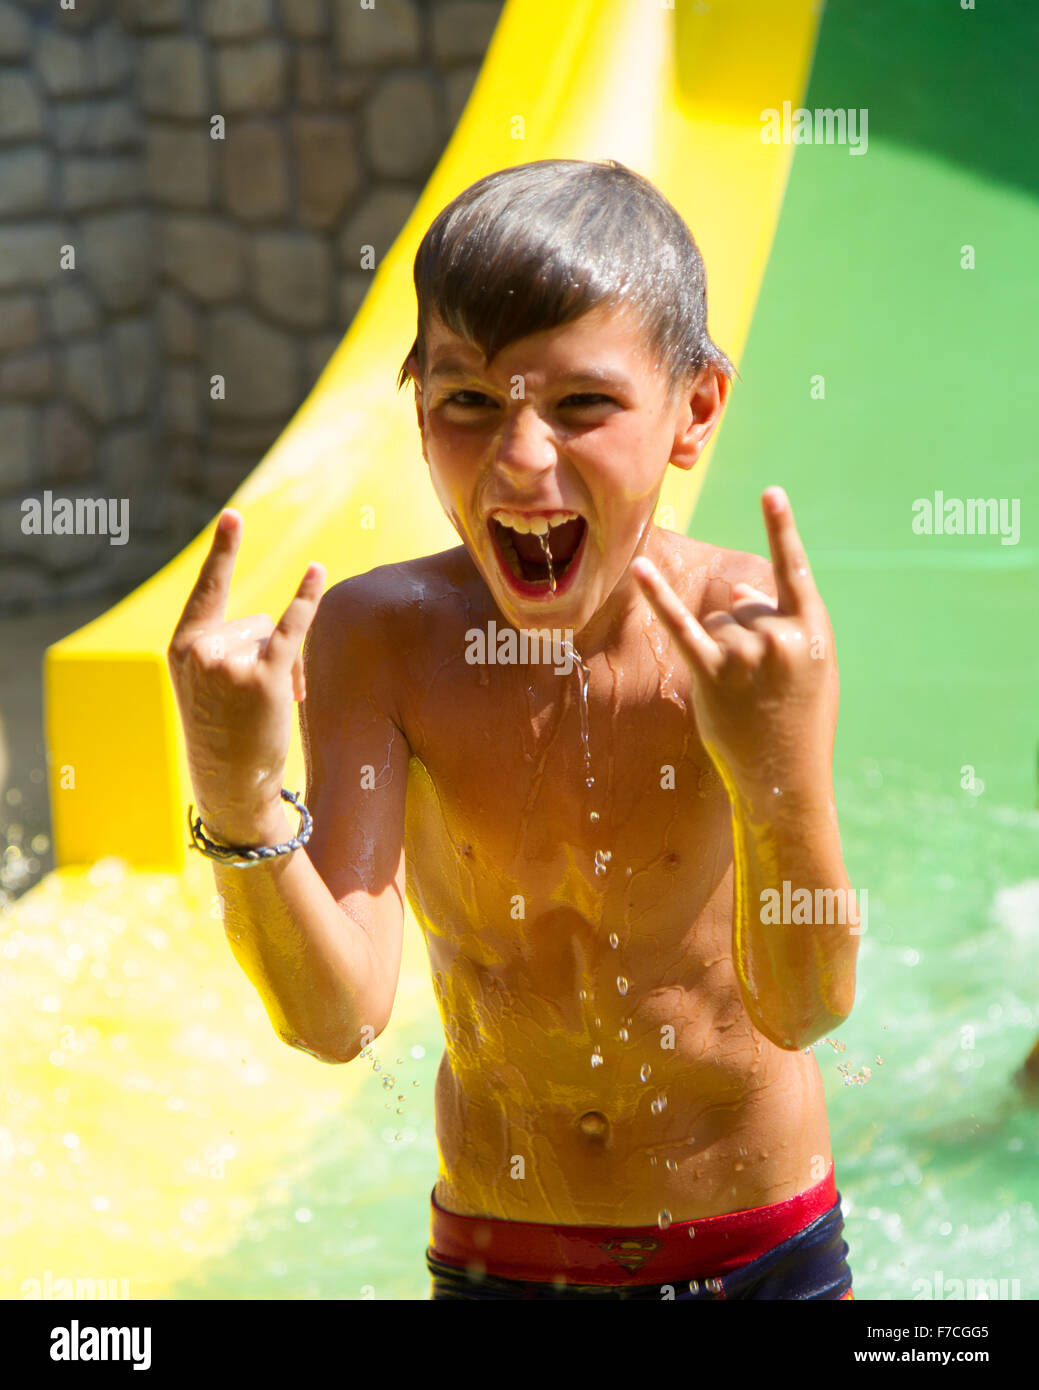 screaming child on water slide at amusement park Stock Photo